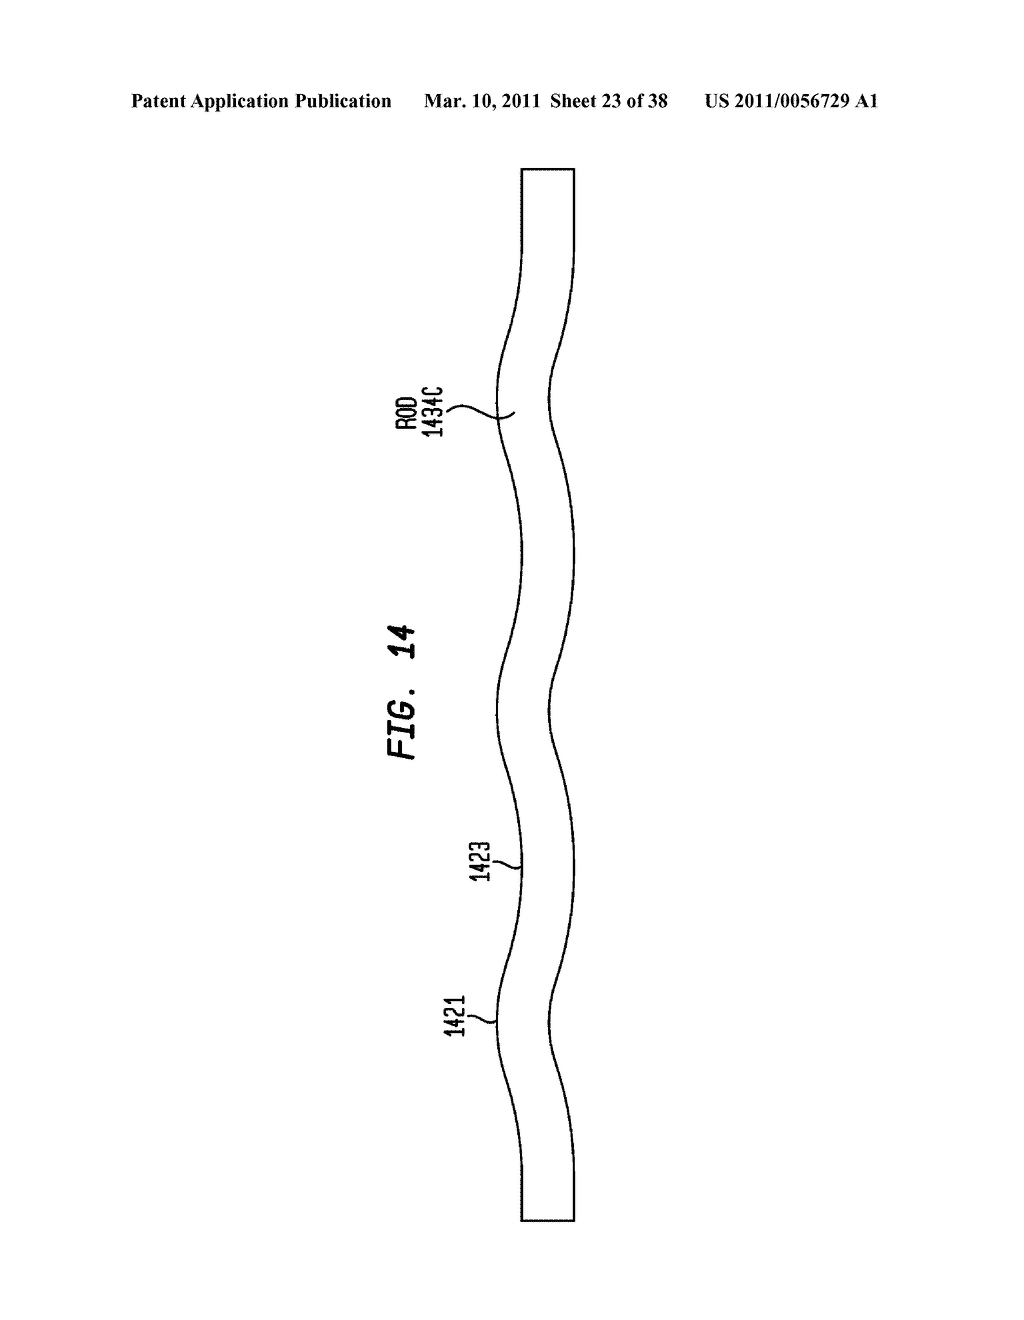 INSULATED CONDUCTIVE ELEMENT HAVING A SUBSTANTIALLY CONTINUOUS BARRIER LAYER FORMED THROUGH CONTINUOUS VAPOR DEPOSITION - diagram, schematic, and image 24